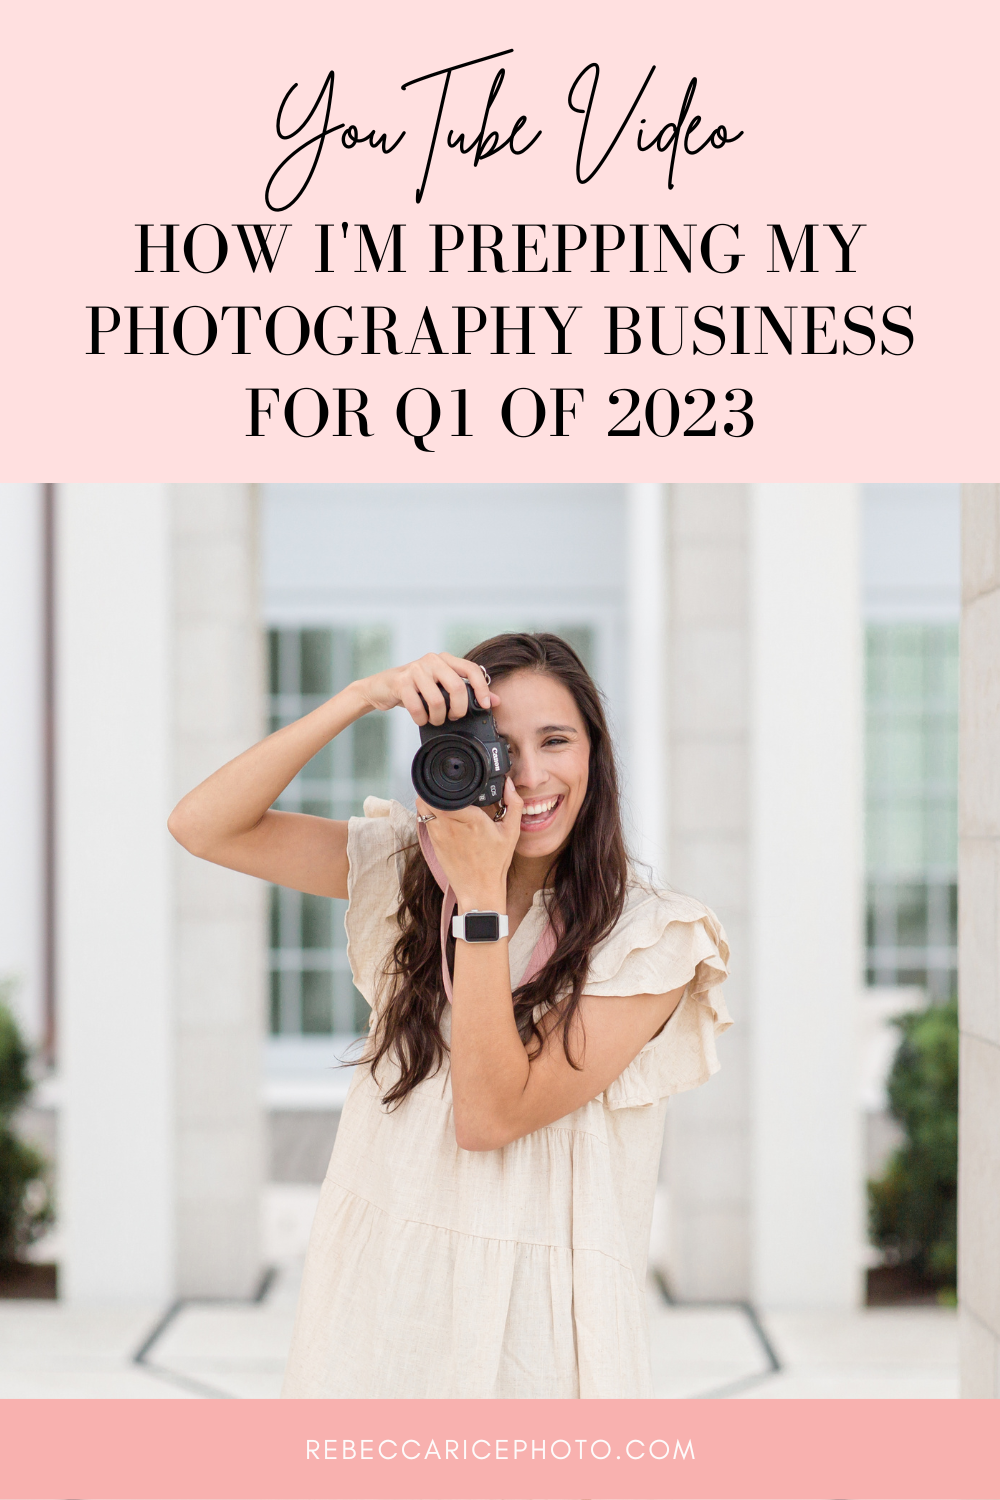 How I'm prepping my photography business for Q1 of 2023 | Photography Business Tips for Q1